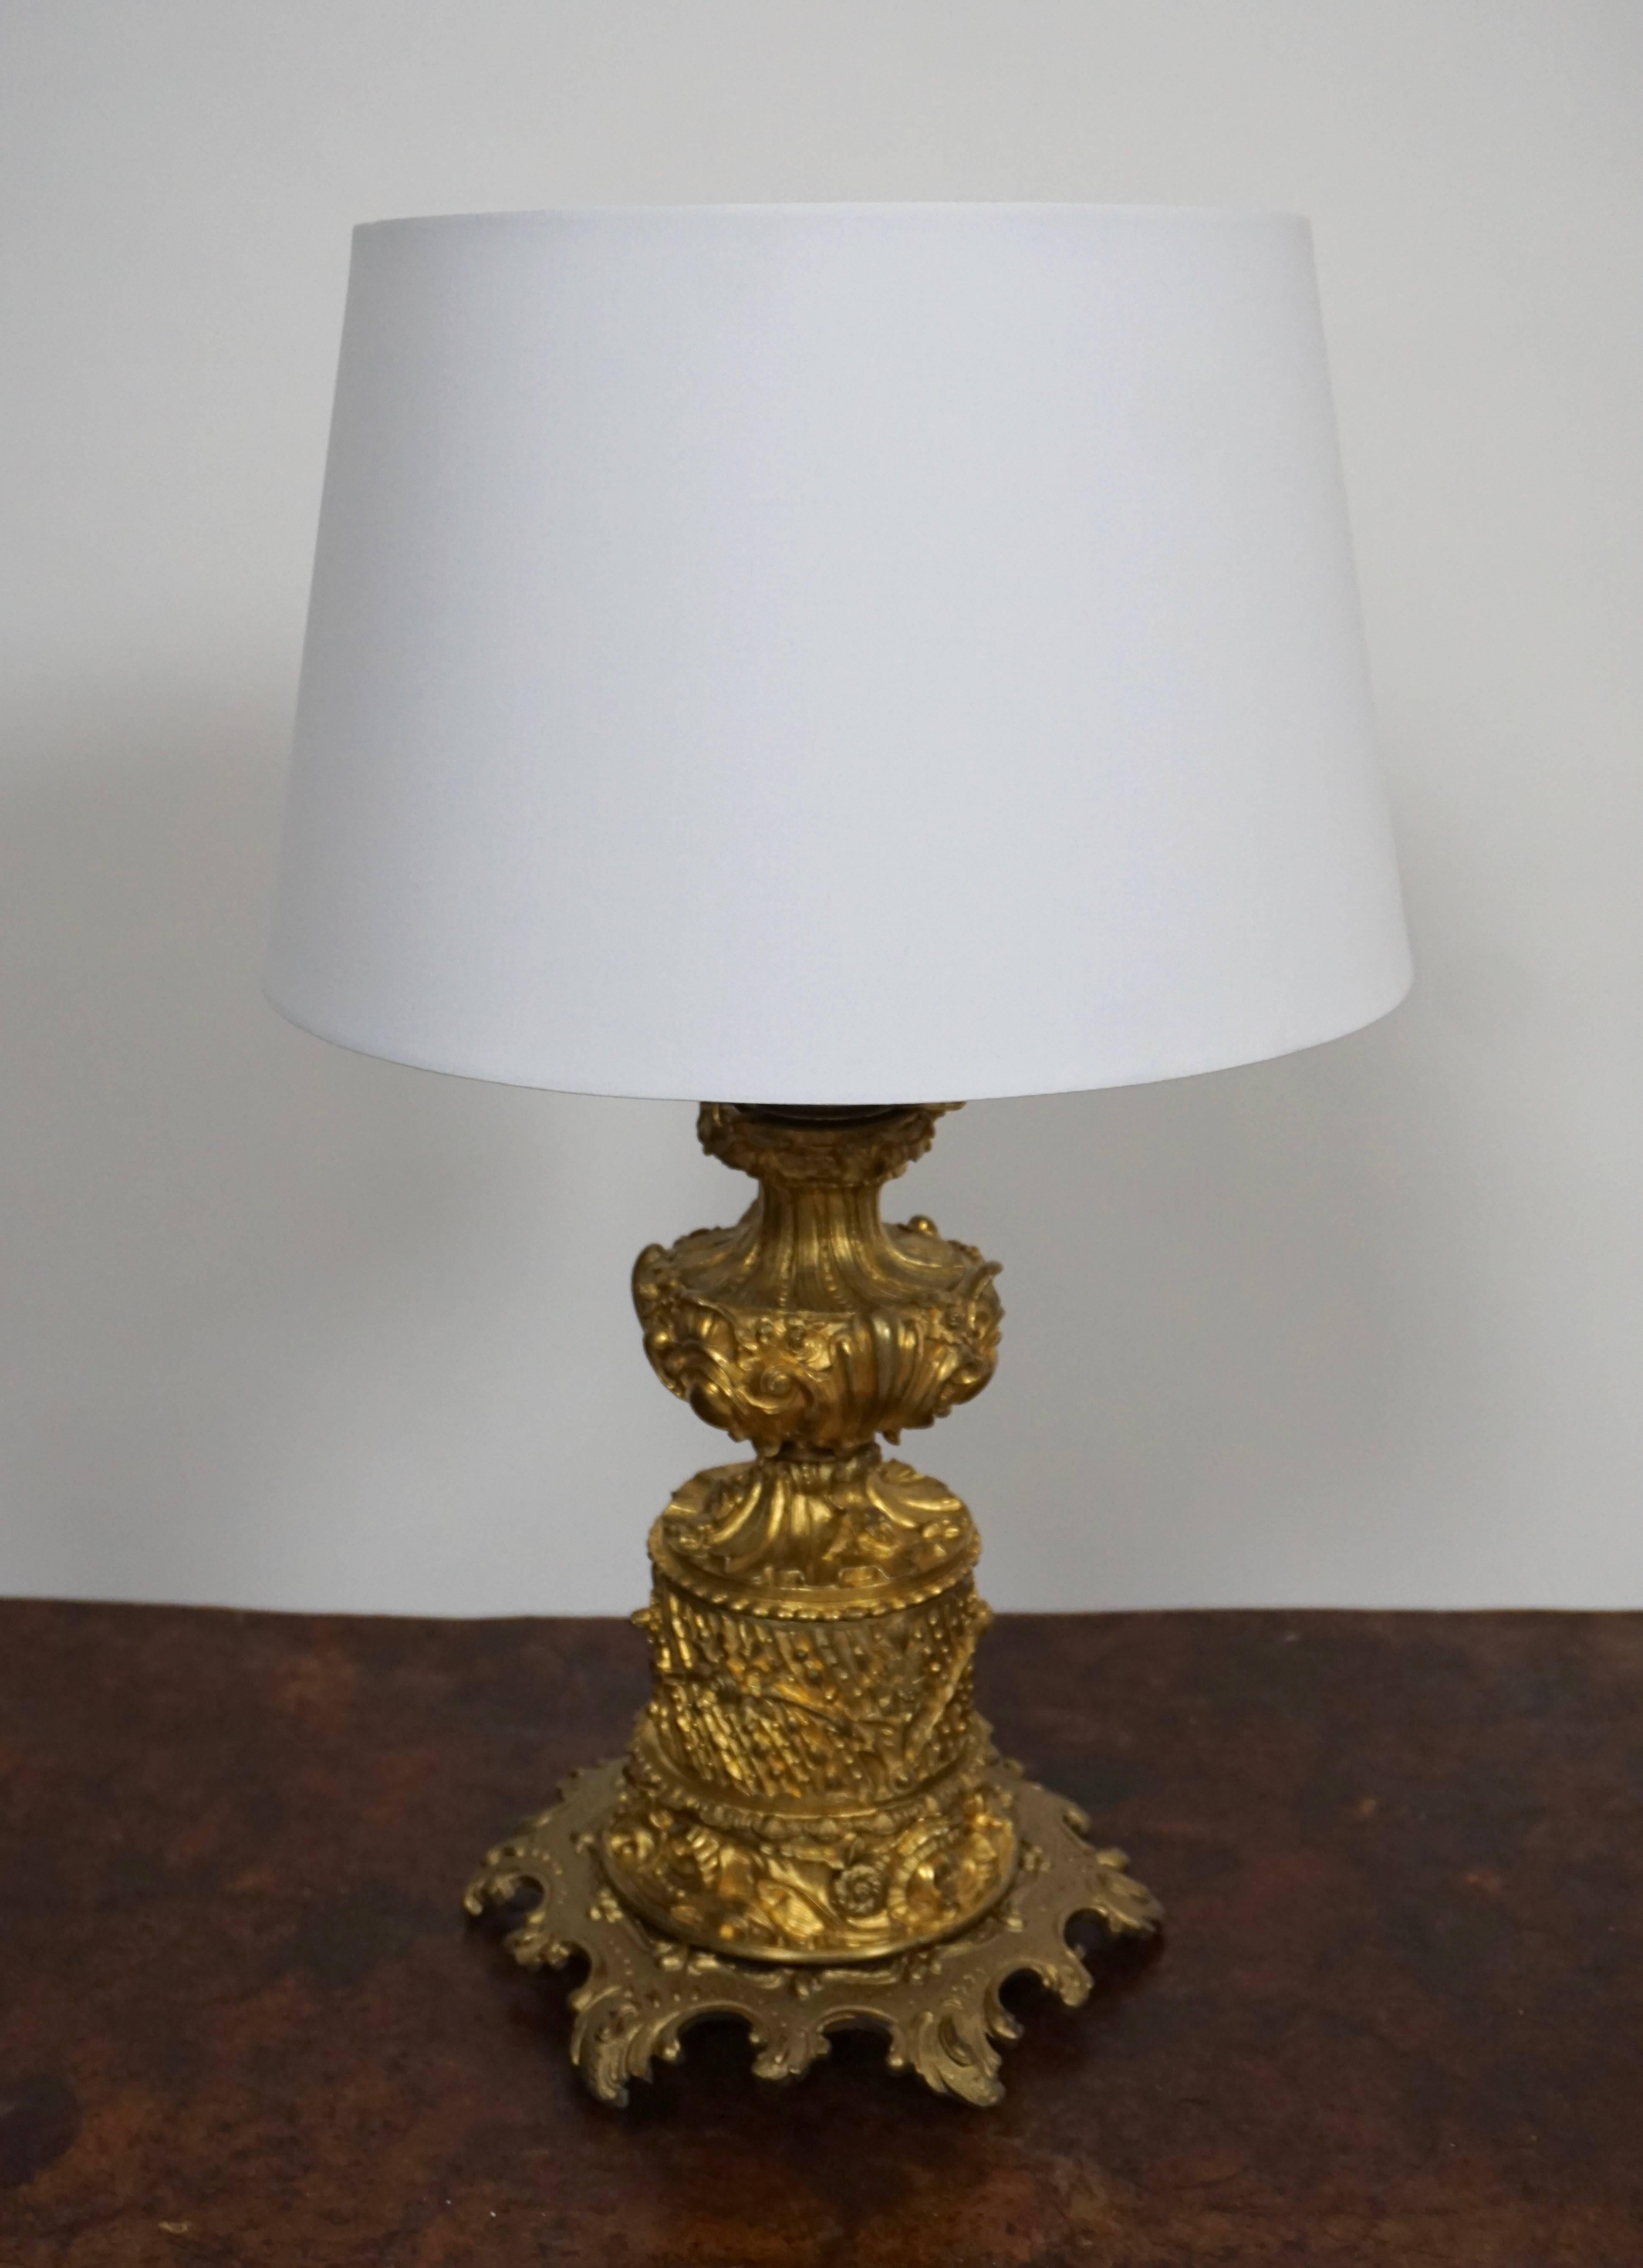 Table lamp.
Height without shade: 50 cm.
Height base without fitting, 30 cm.
Diameter: 24 cm.

Height with shade: 55 cm.
Diameter: 34 cm.

Price without shade.